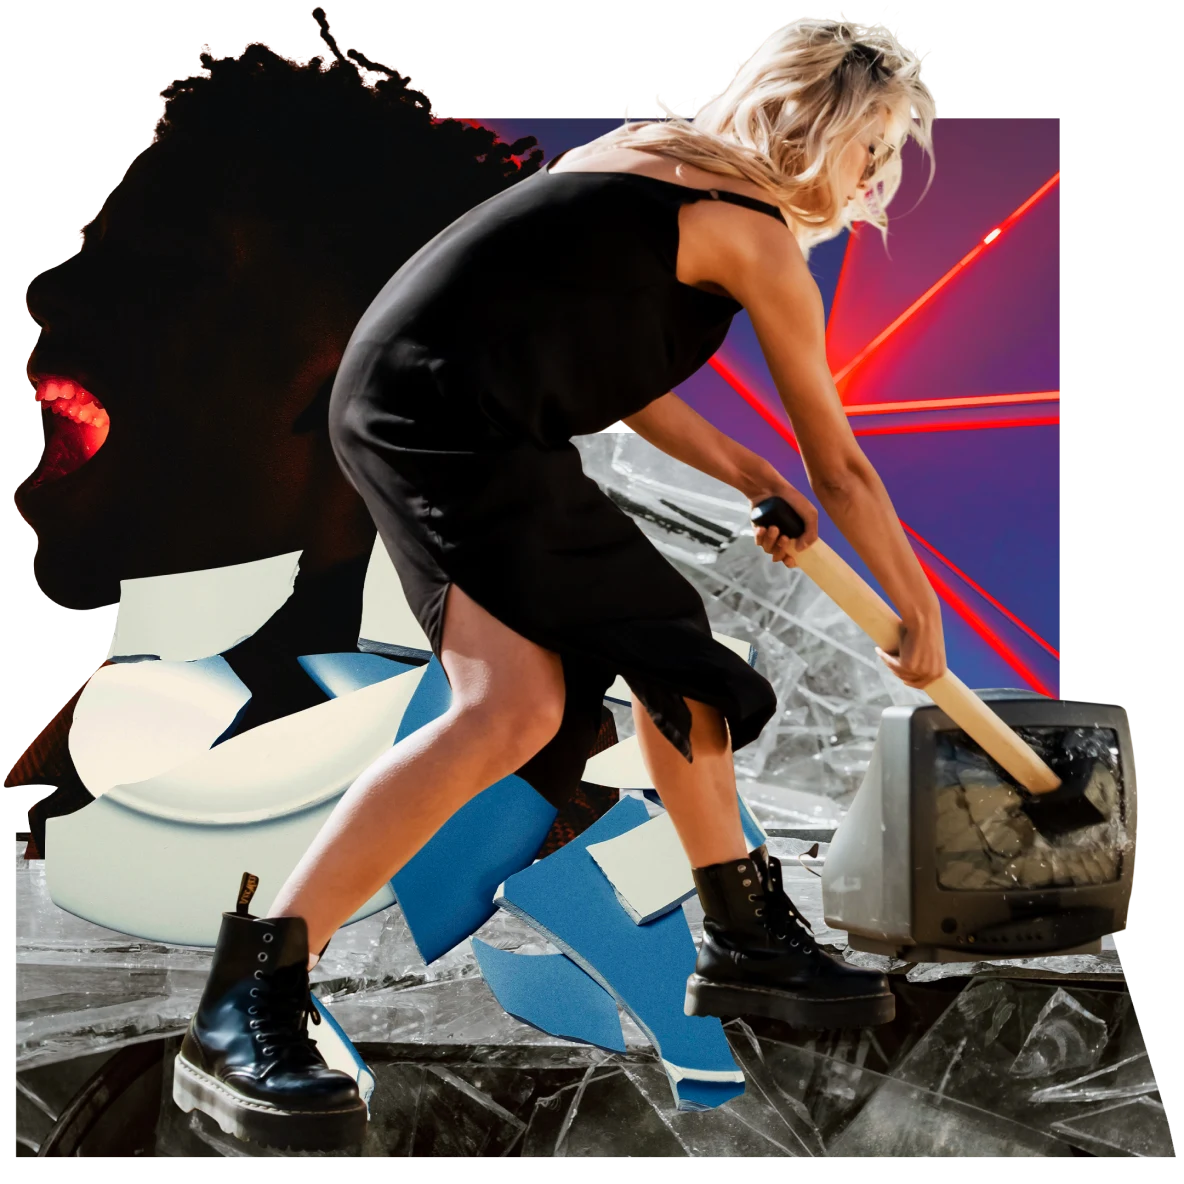 White woman with long blonde hair in a black dress and black combat boots. She bends to smash a sledgehammer through a small TV screen. Silhouette of someone yelling on the left. Backdrop of shards of navy blue, purple, white and red.